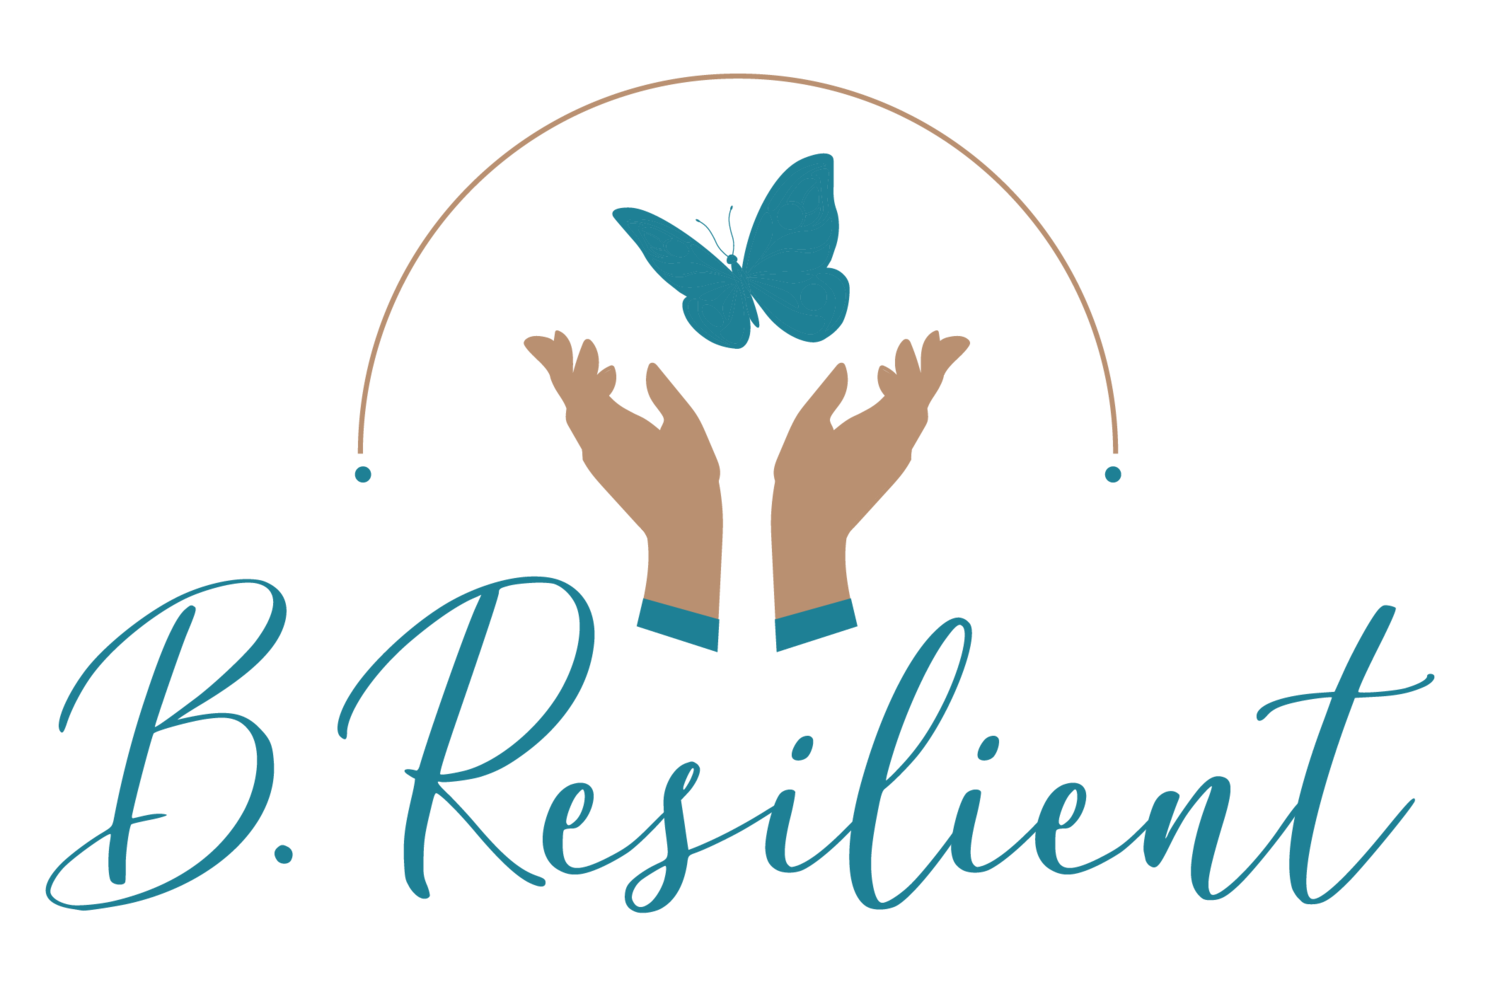 B. Resilient